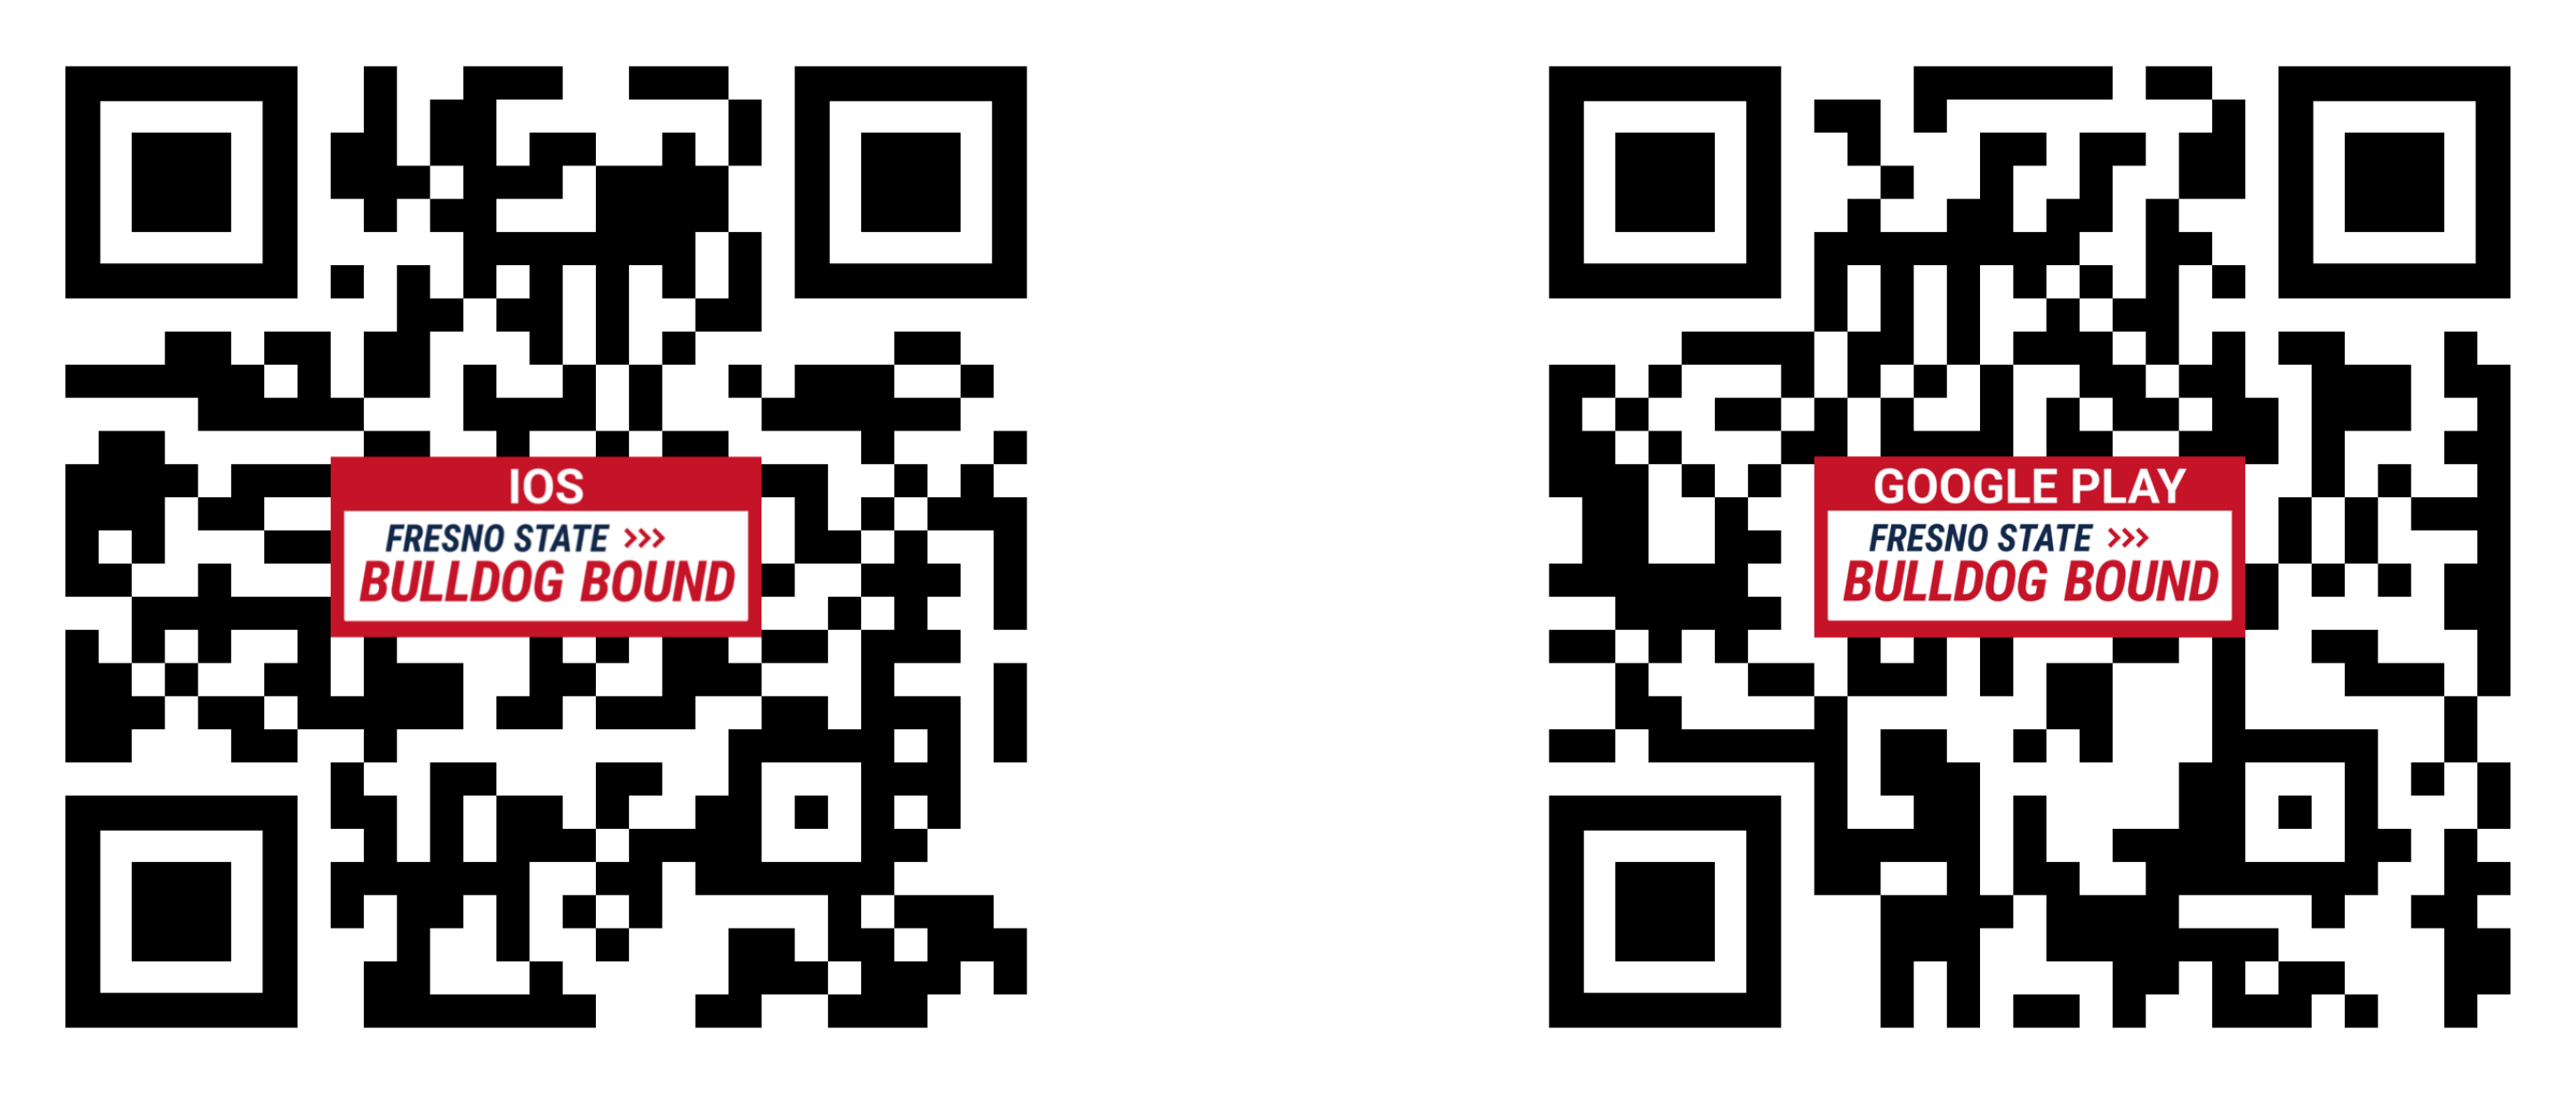 qr codes to download the app, IOS and Google Play